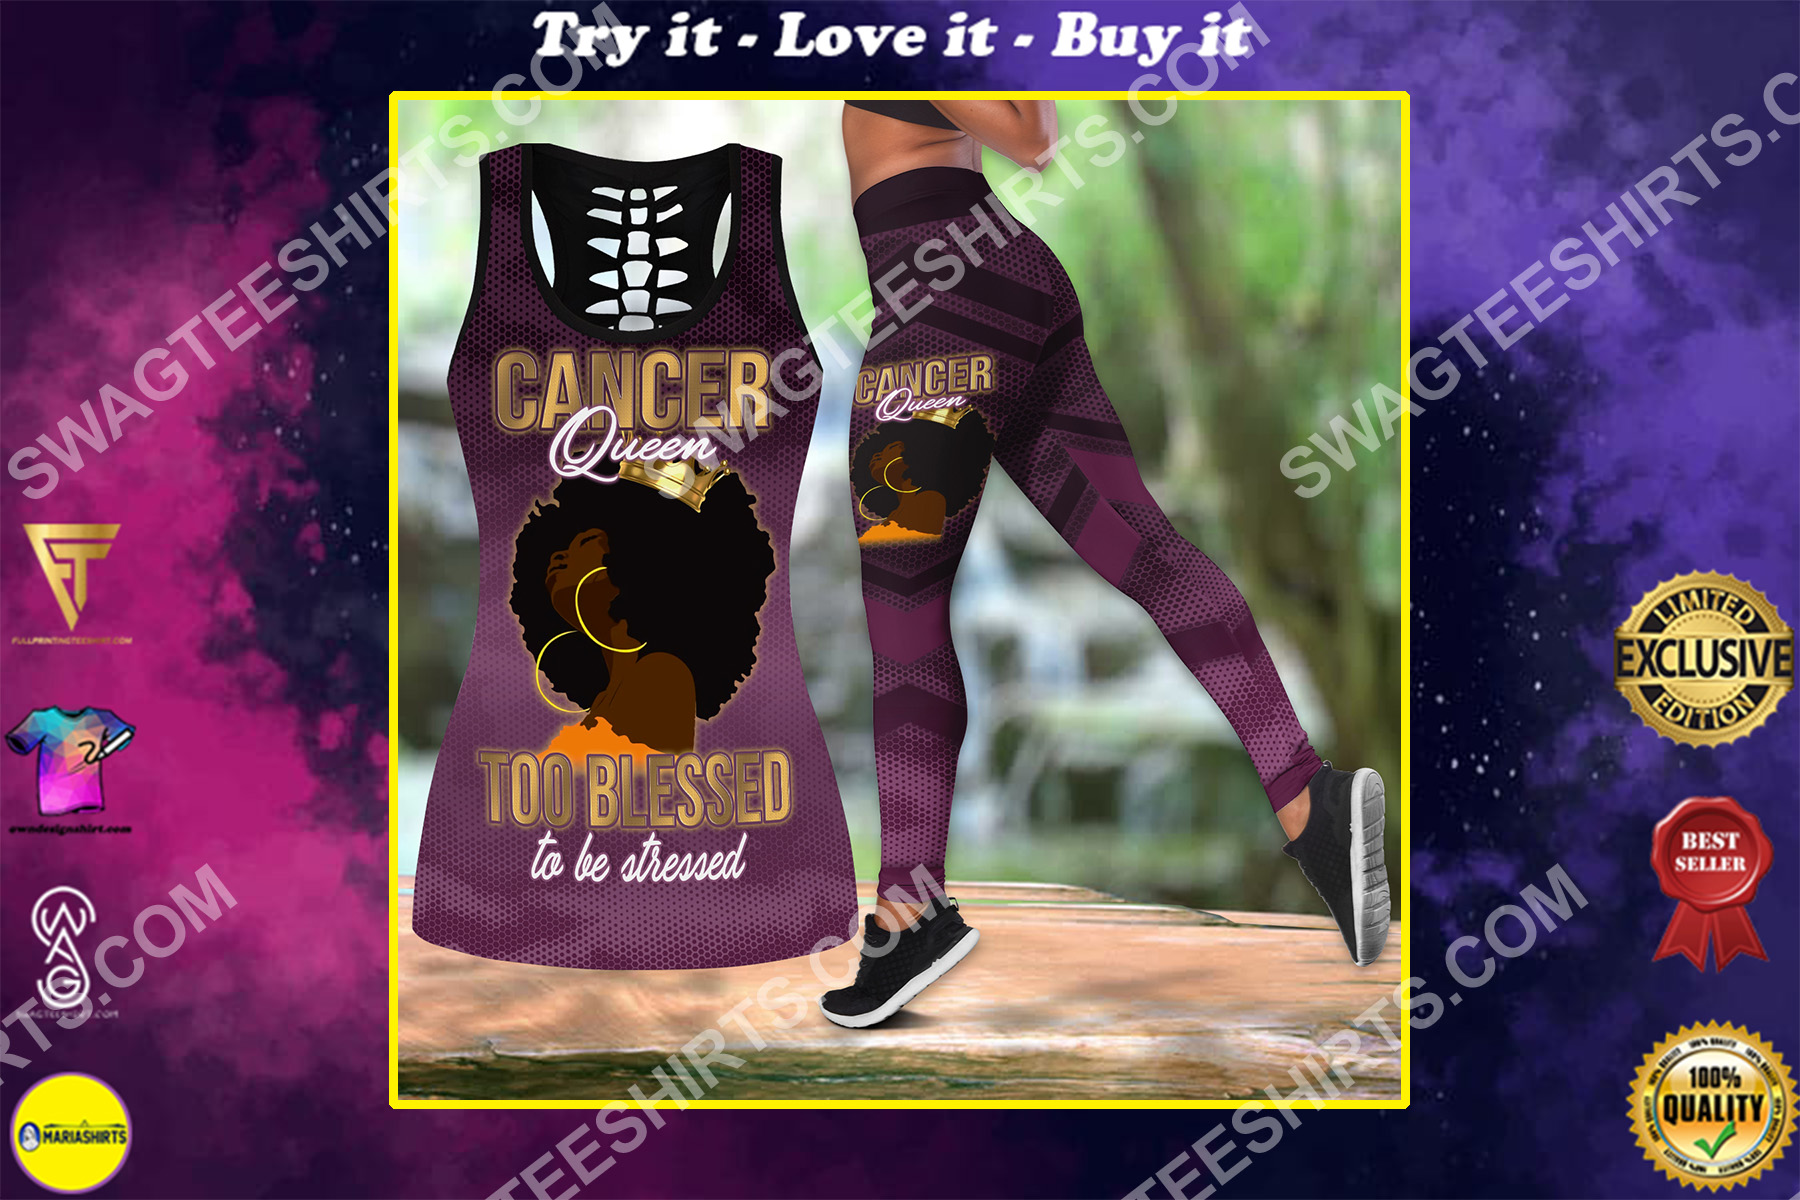 cancer queen too blessed to be stressed birthday gift set sports outfit